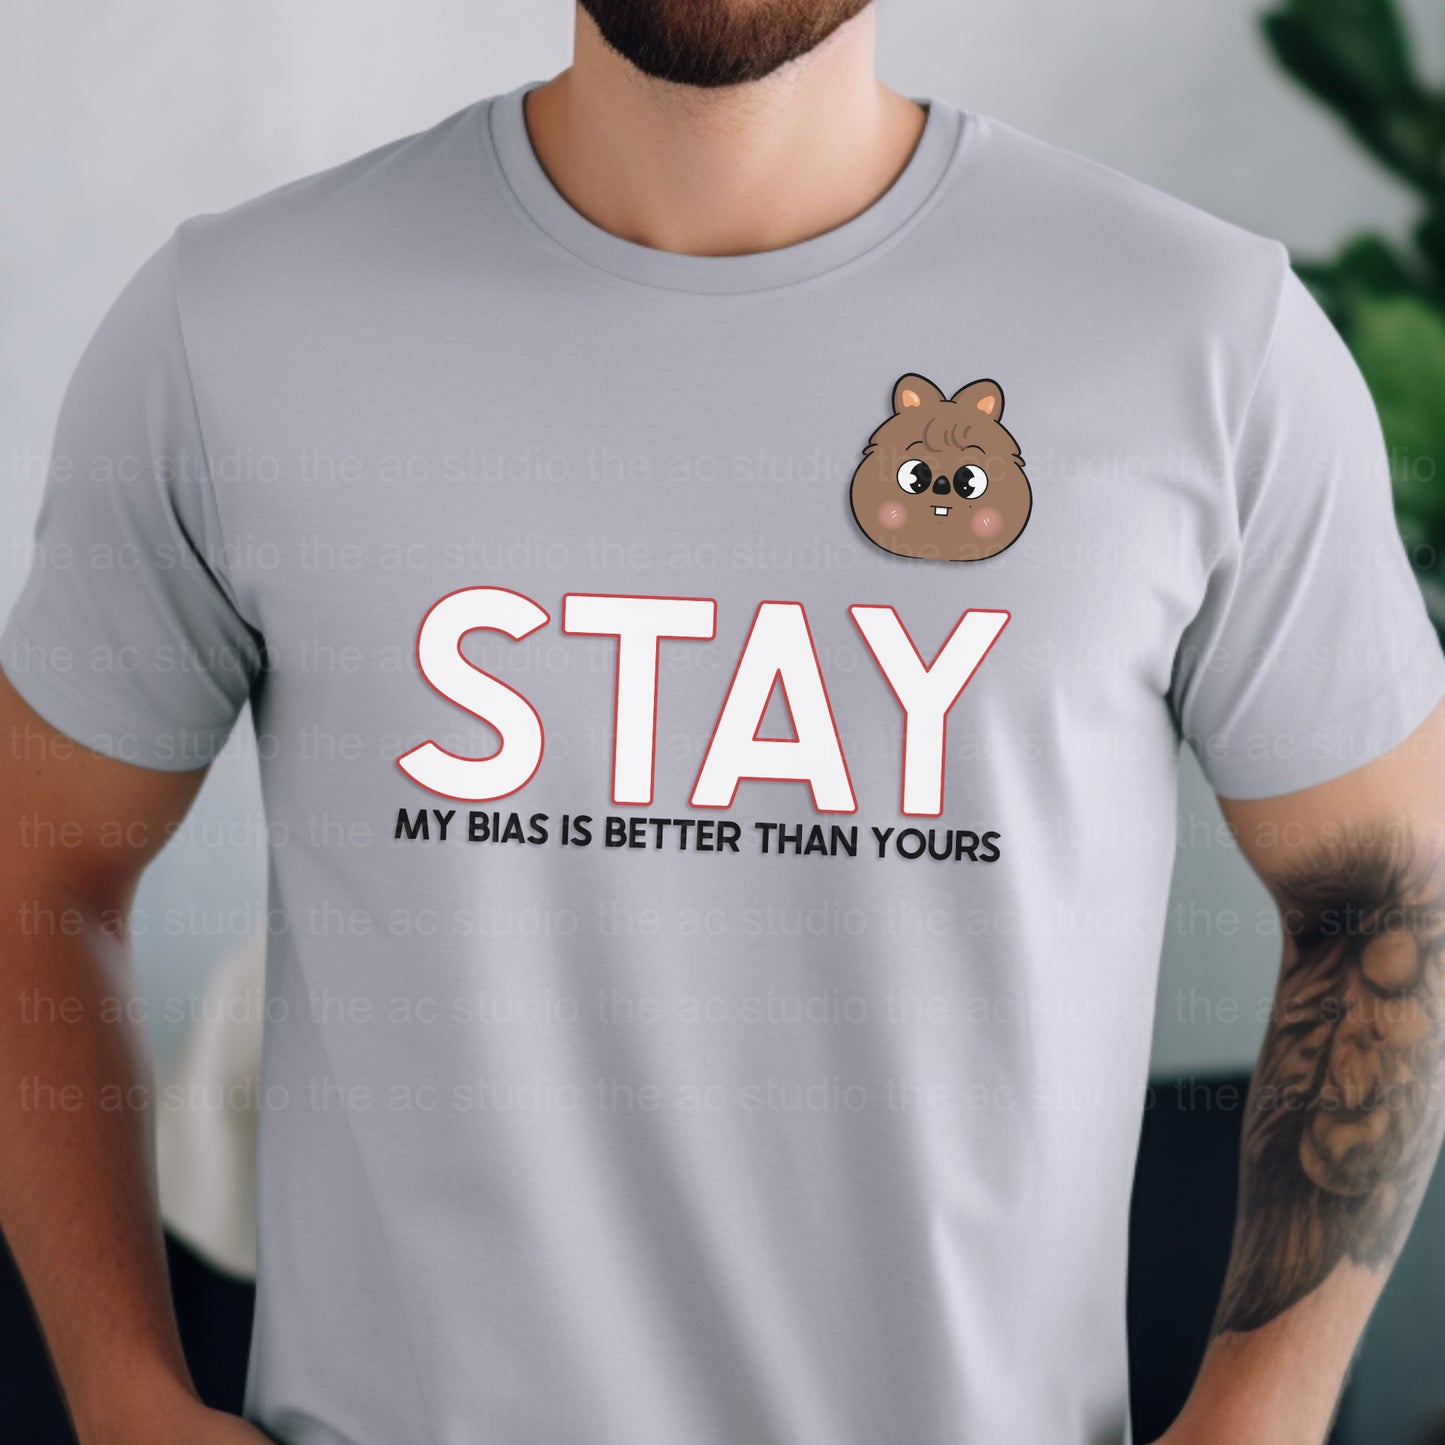 STAY - My Bias Is Better Than Yours T-Shirt (Gray)